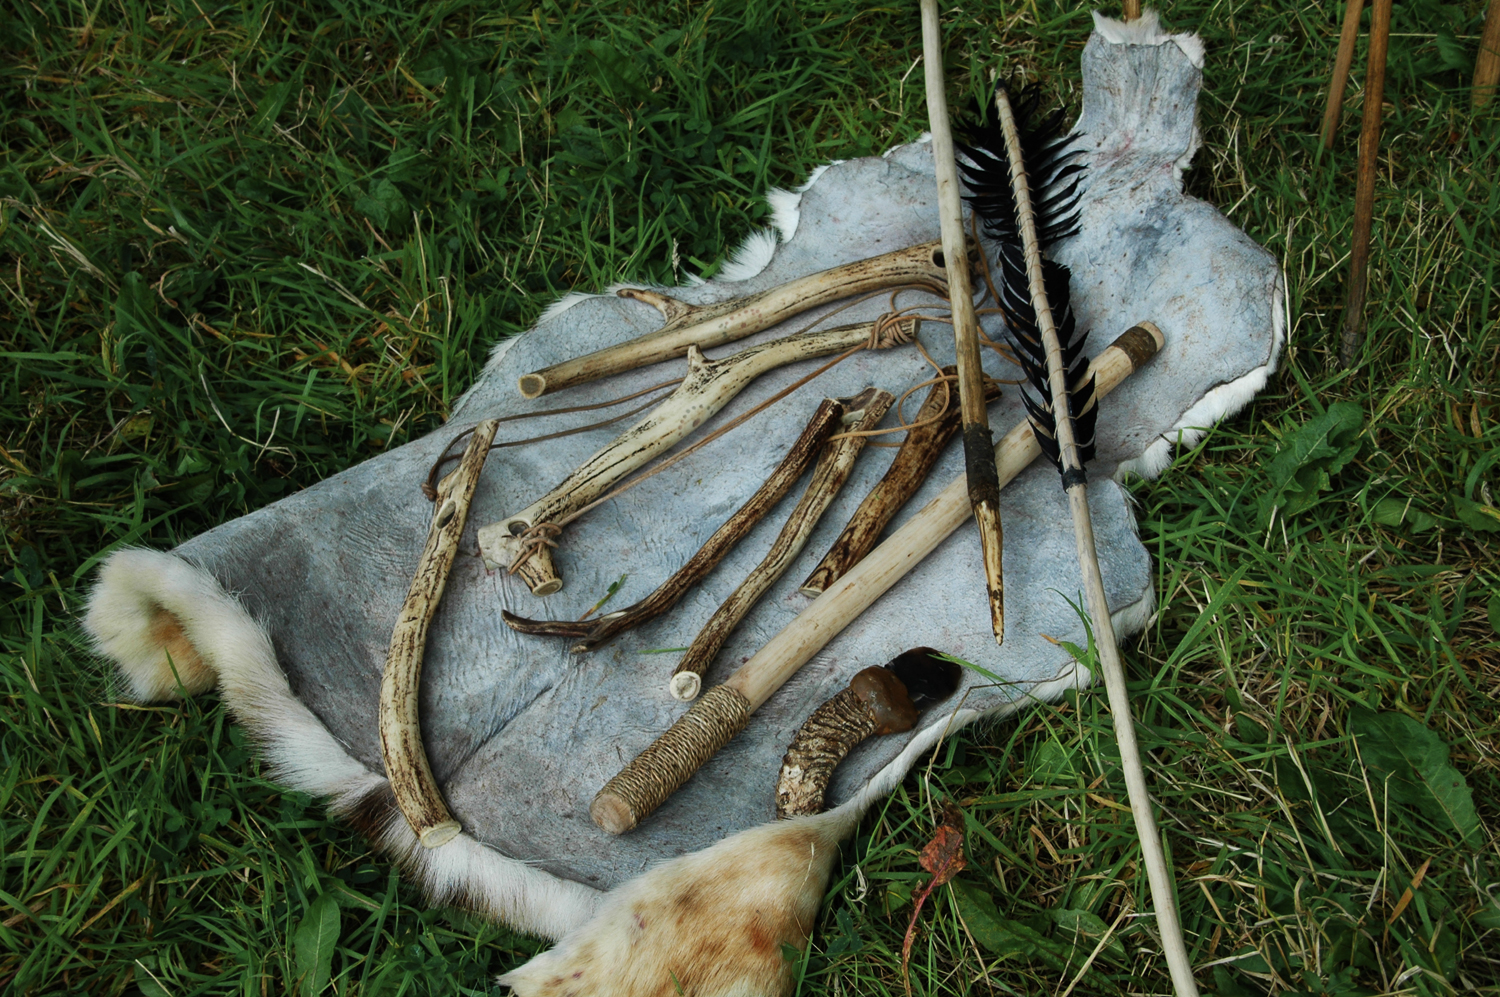 Neanderthals extinct human ancestors spears bows and arrows refined tools archaeologists